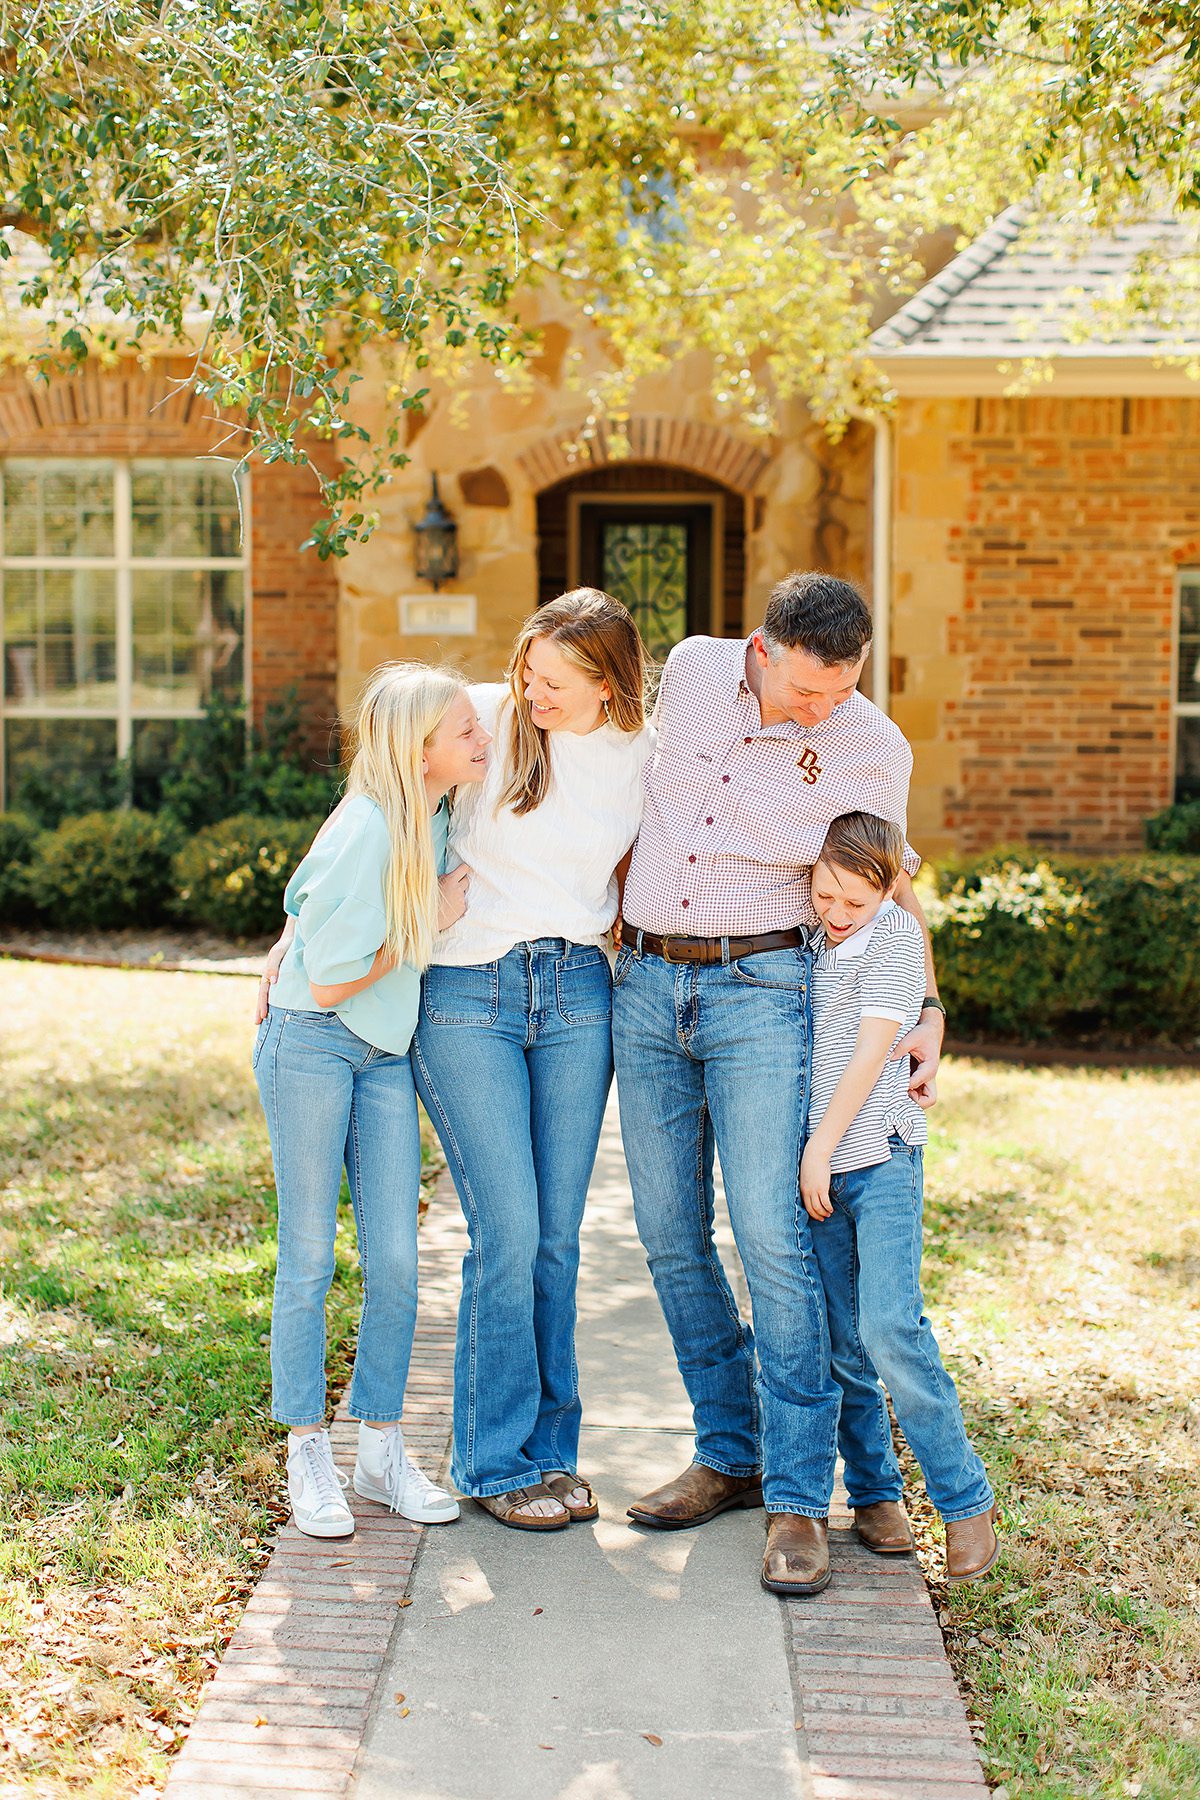 Rob McClelland and family in Dripping Springs, Texas he is running for school board of DSISD